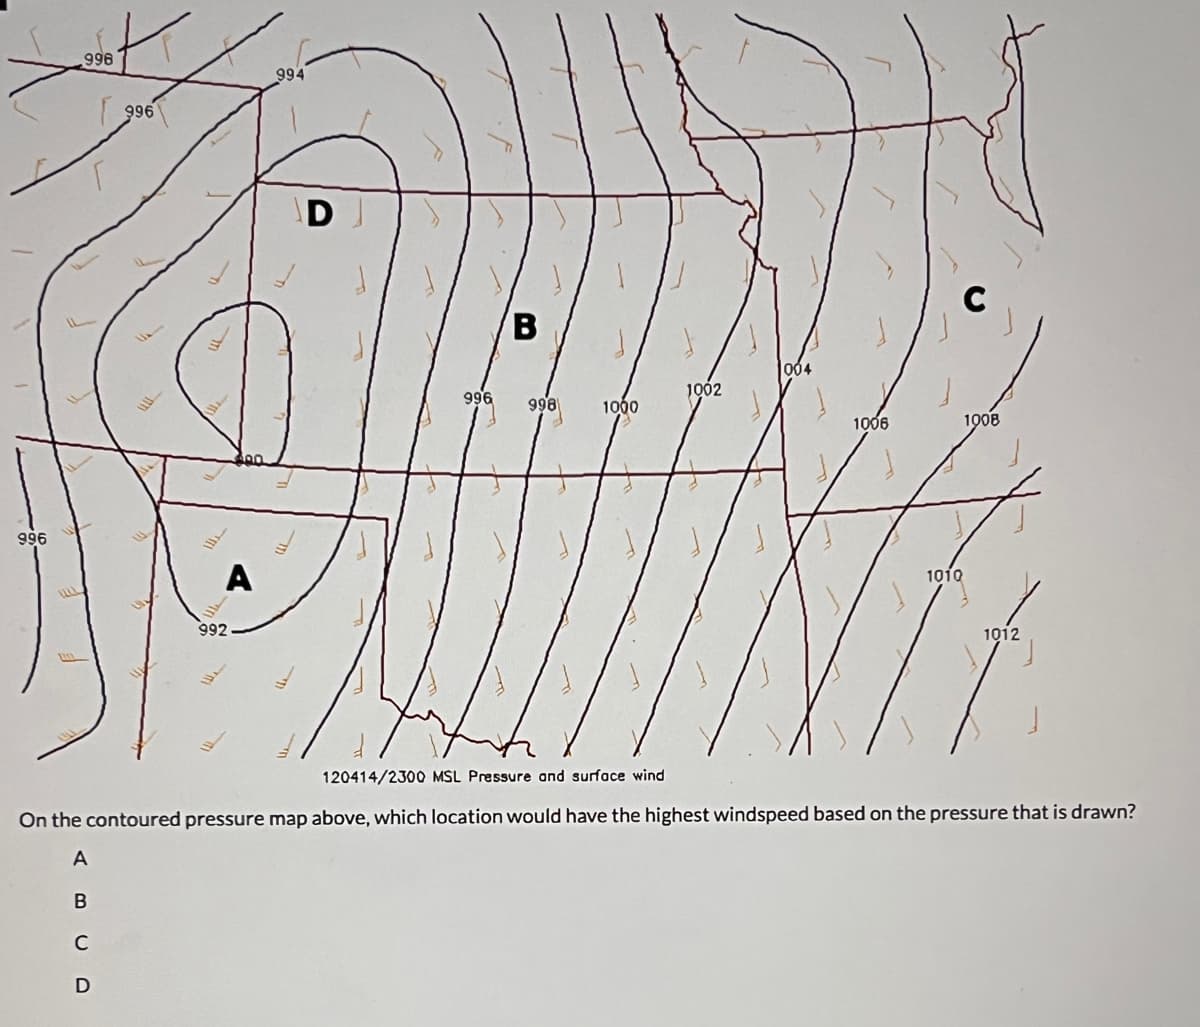 996
996
996
B
C
D
A
992
994
D
996
B
998
1000
1002
1006
1010
1008
1012
120414/2300 MSL Pressure and surface wind
On the contoured pressure map above, which location would have the highest windspeed based on the pressure that is drawn?
A